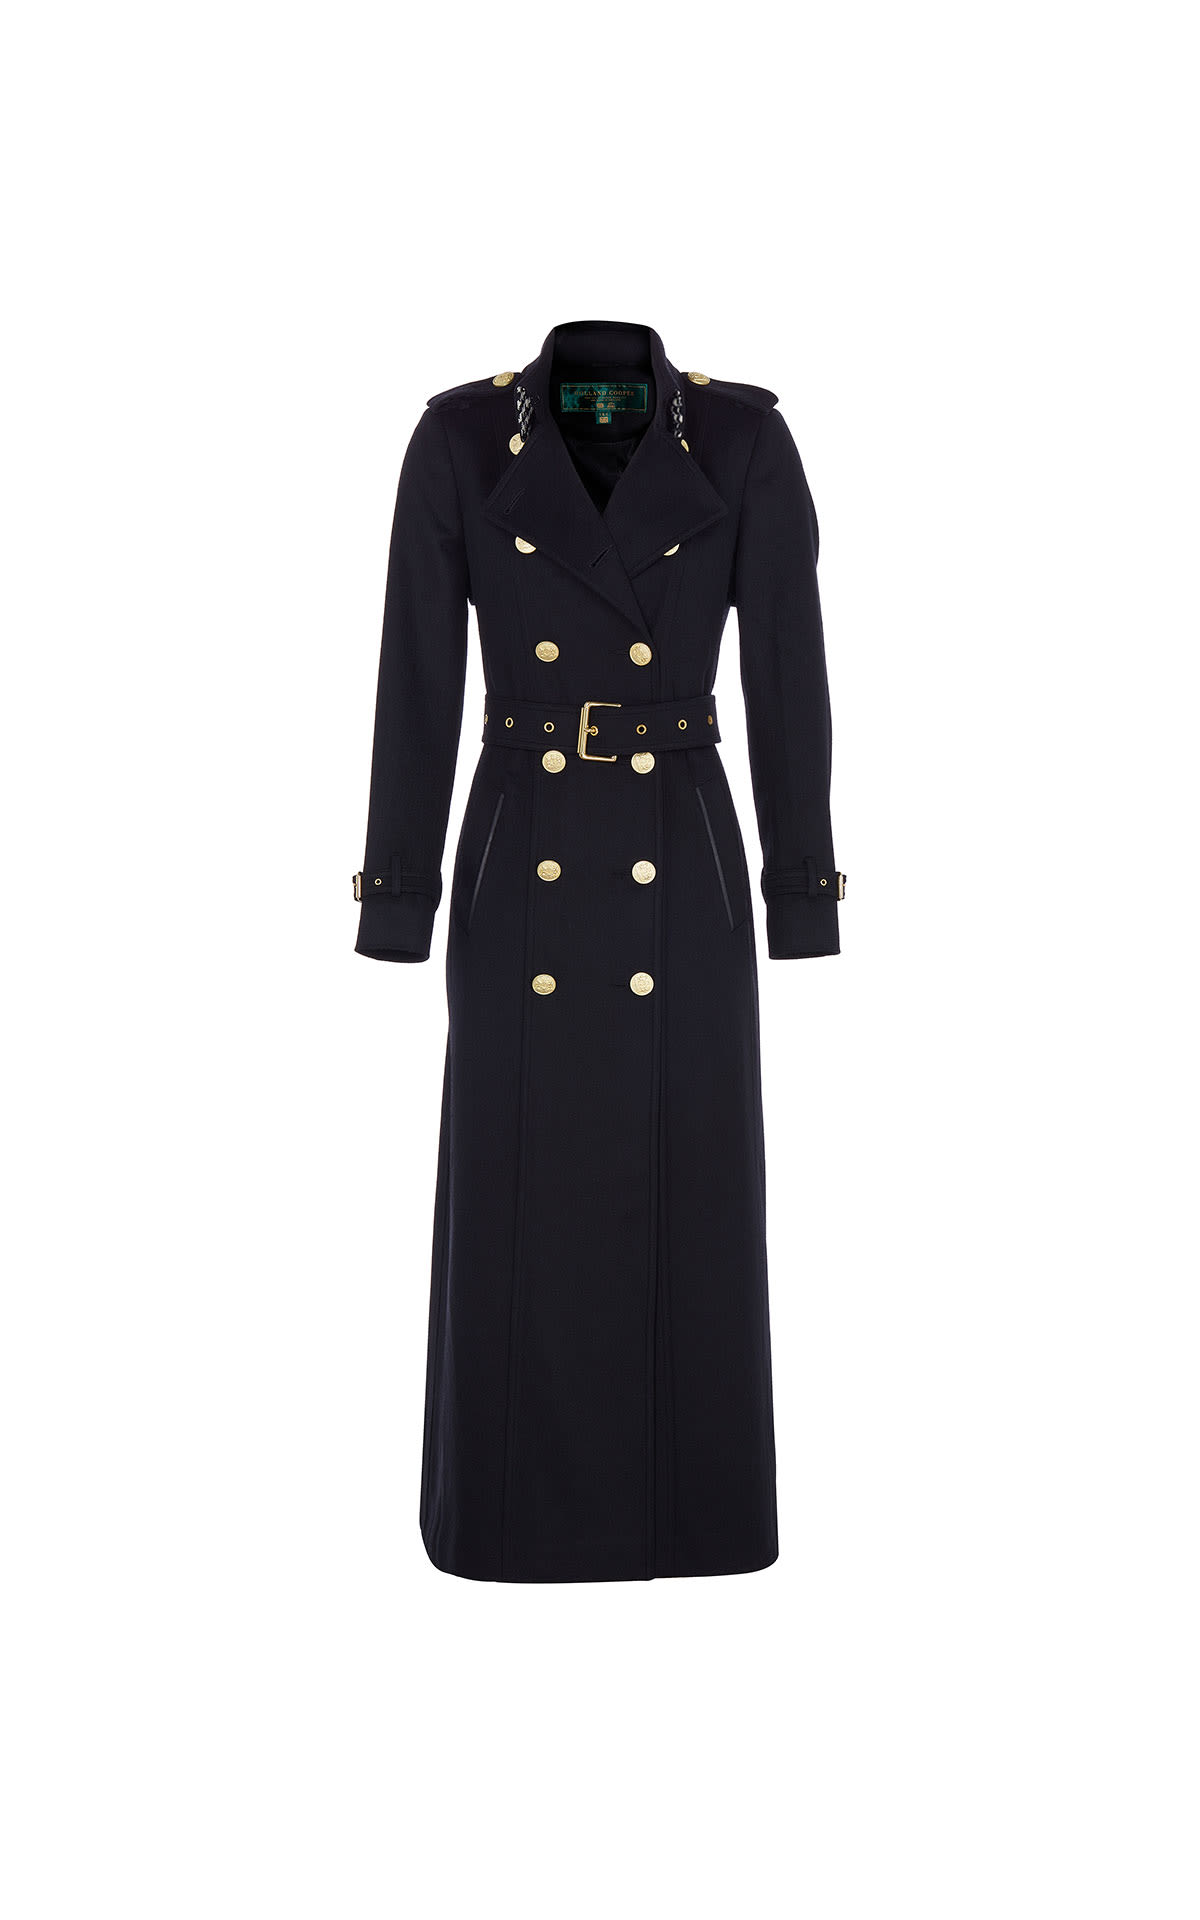 Holland Cooper Full length marlborough trench coat black from Bicester Village